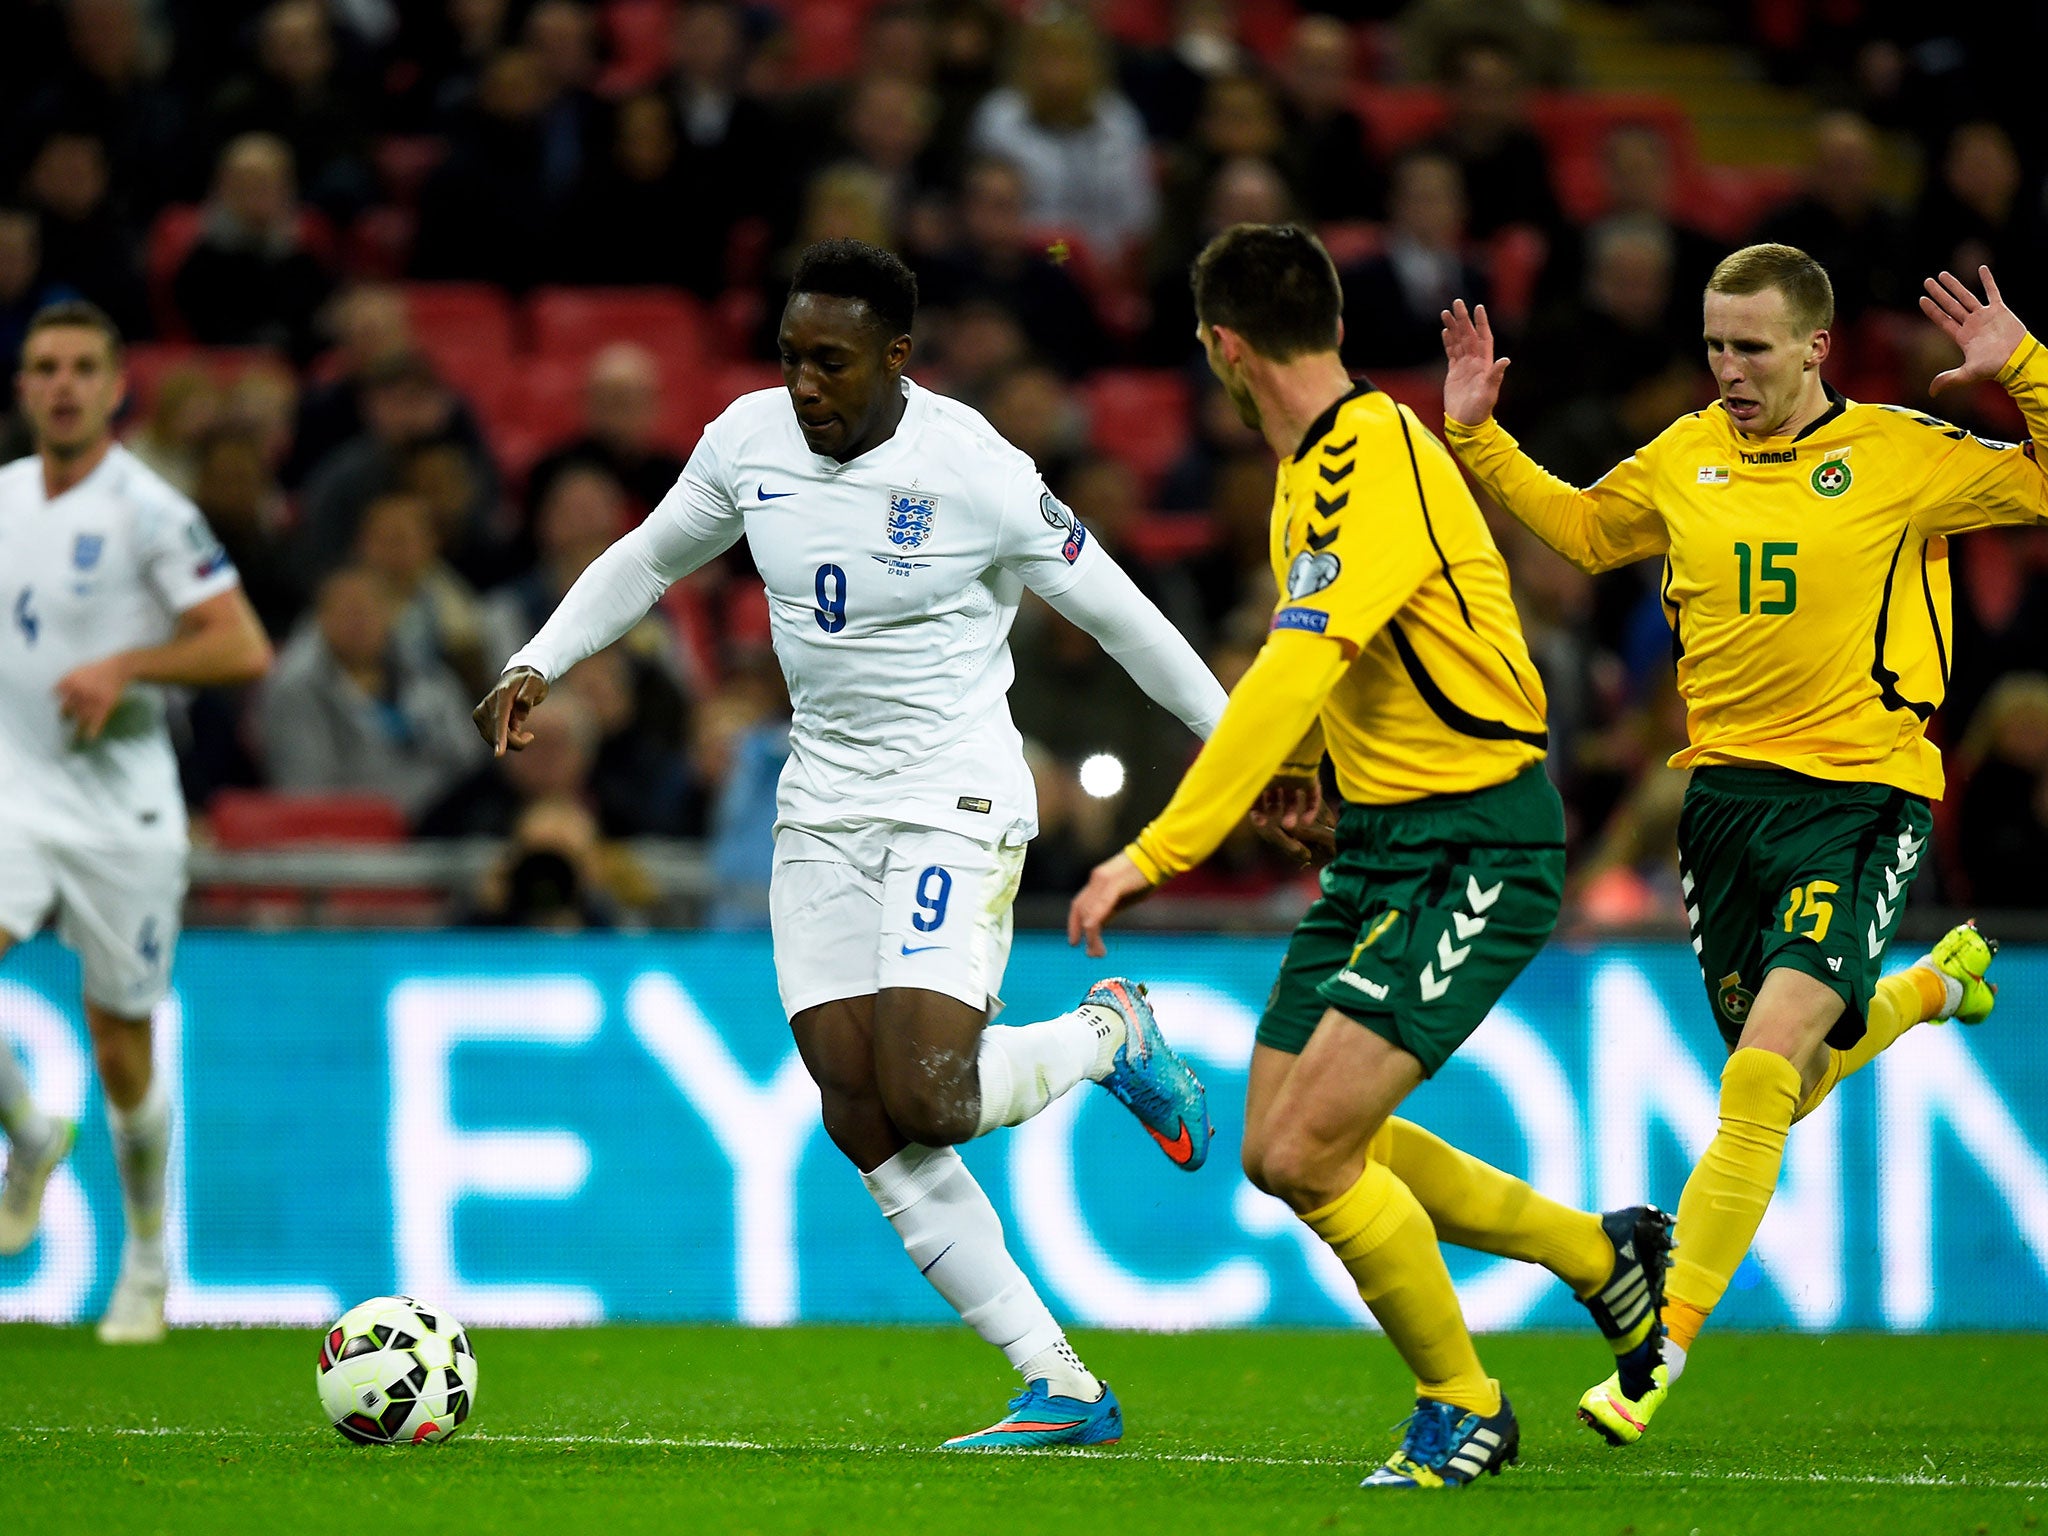 Danny Welbeck picked up a knee injury in England's 4-0 win over Lithuania